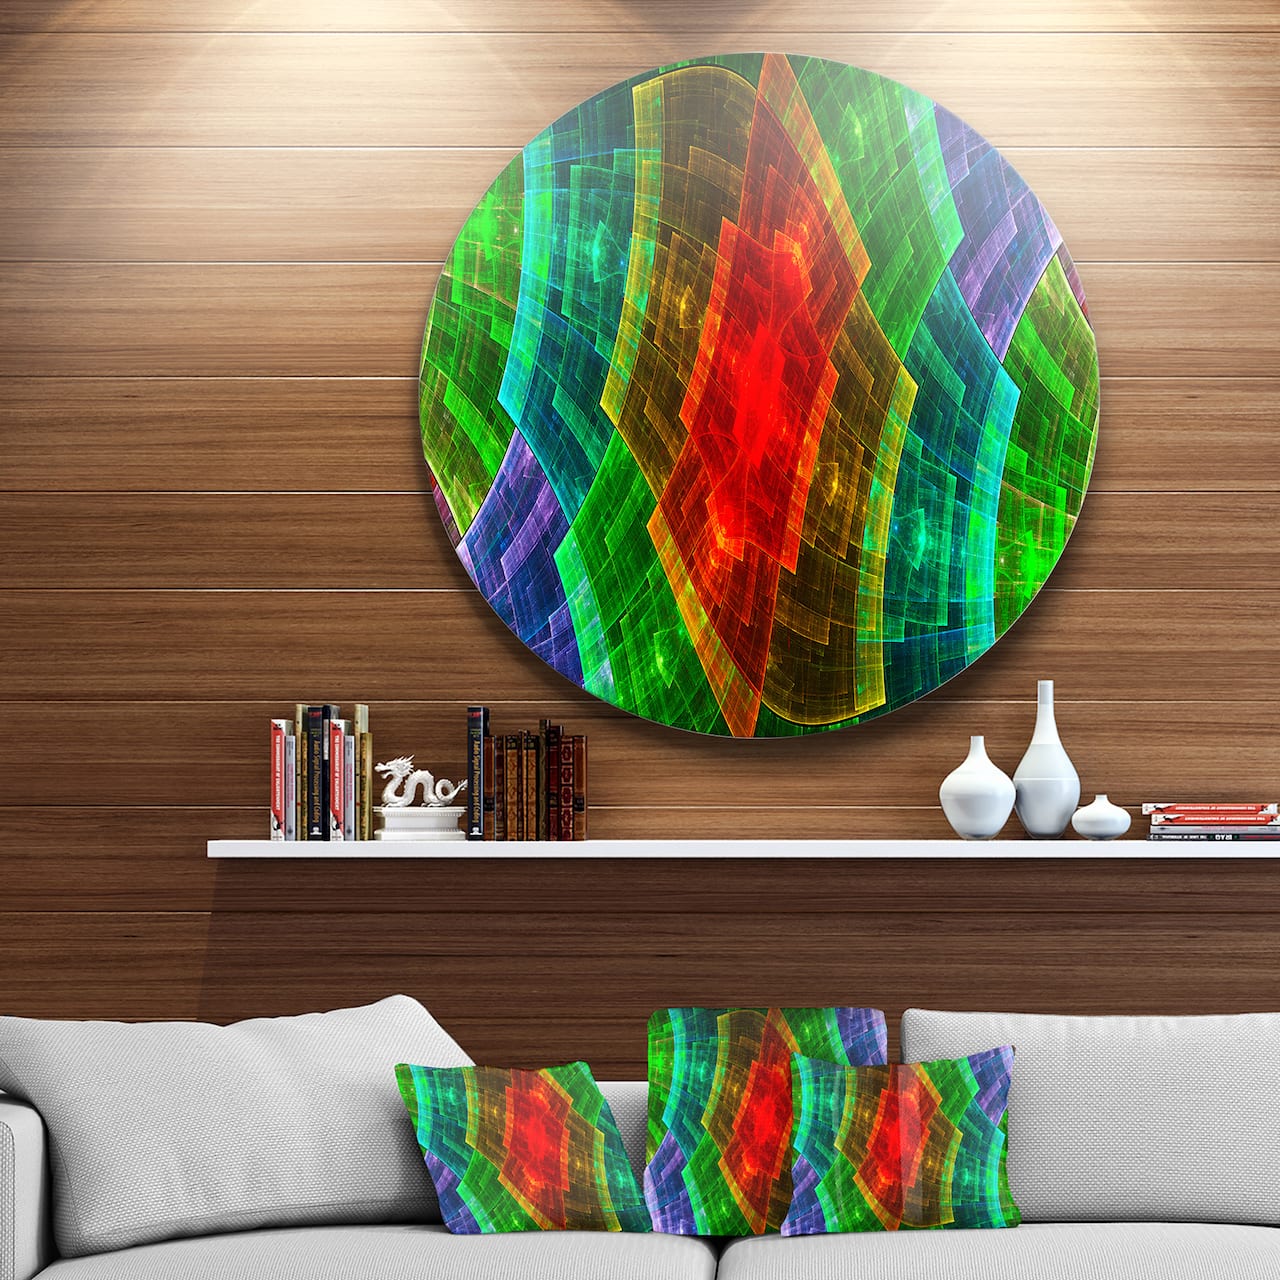 Designart - Multi Color Psychedelic Fractal Metal Grid&#x27; Abstract Metal Circle Wall Art